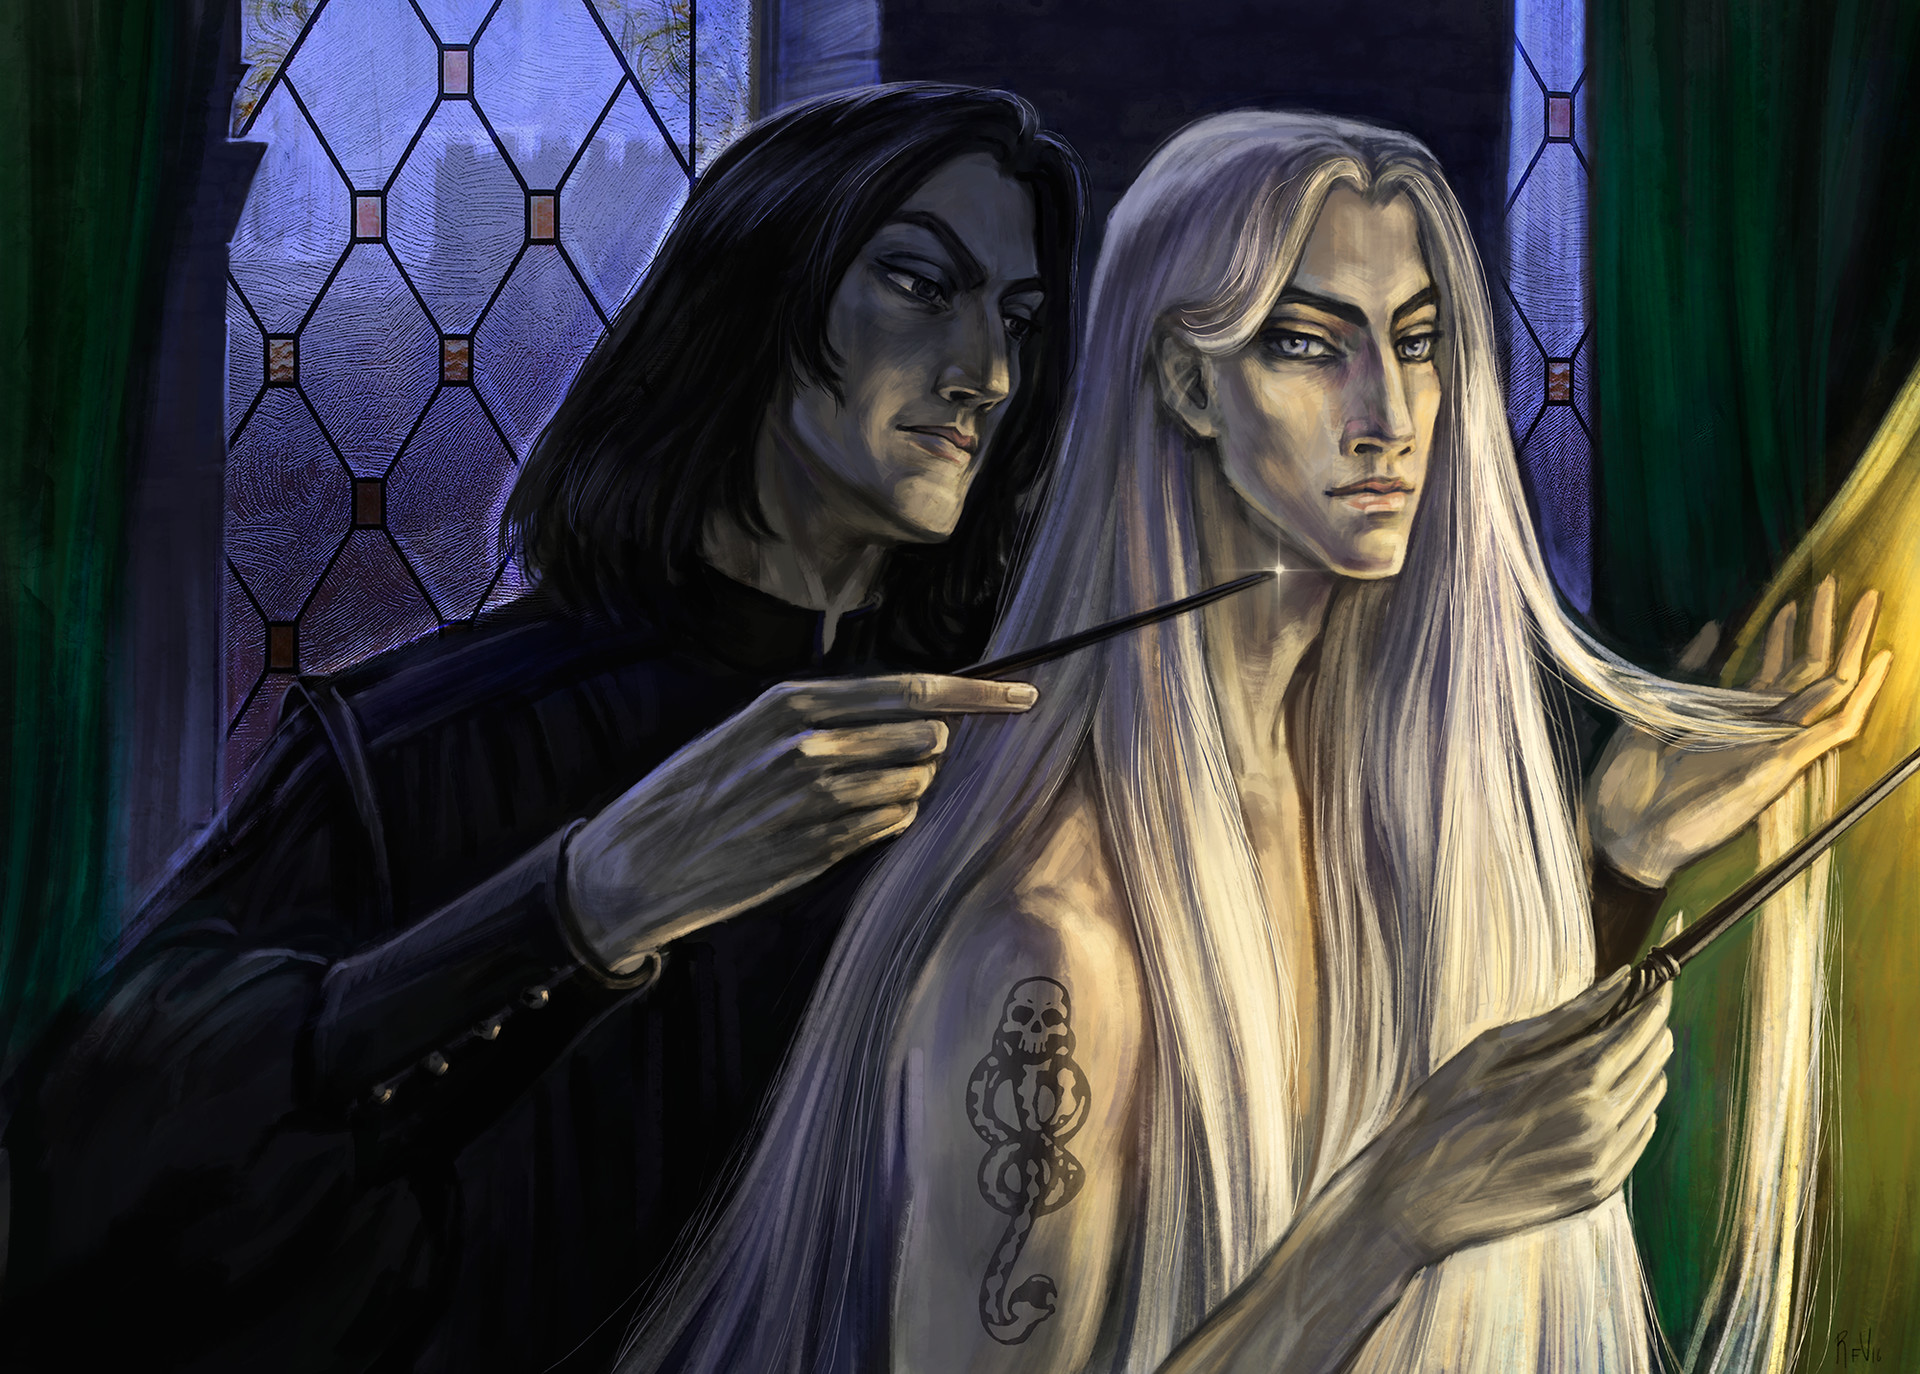 My characters cosplaying Severus Snape and Lucius Malfoy.